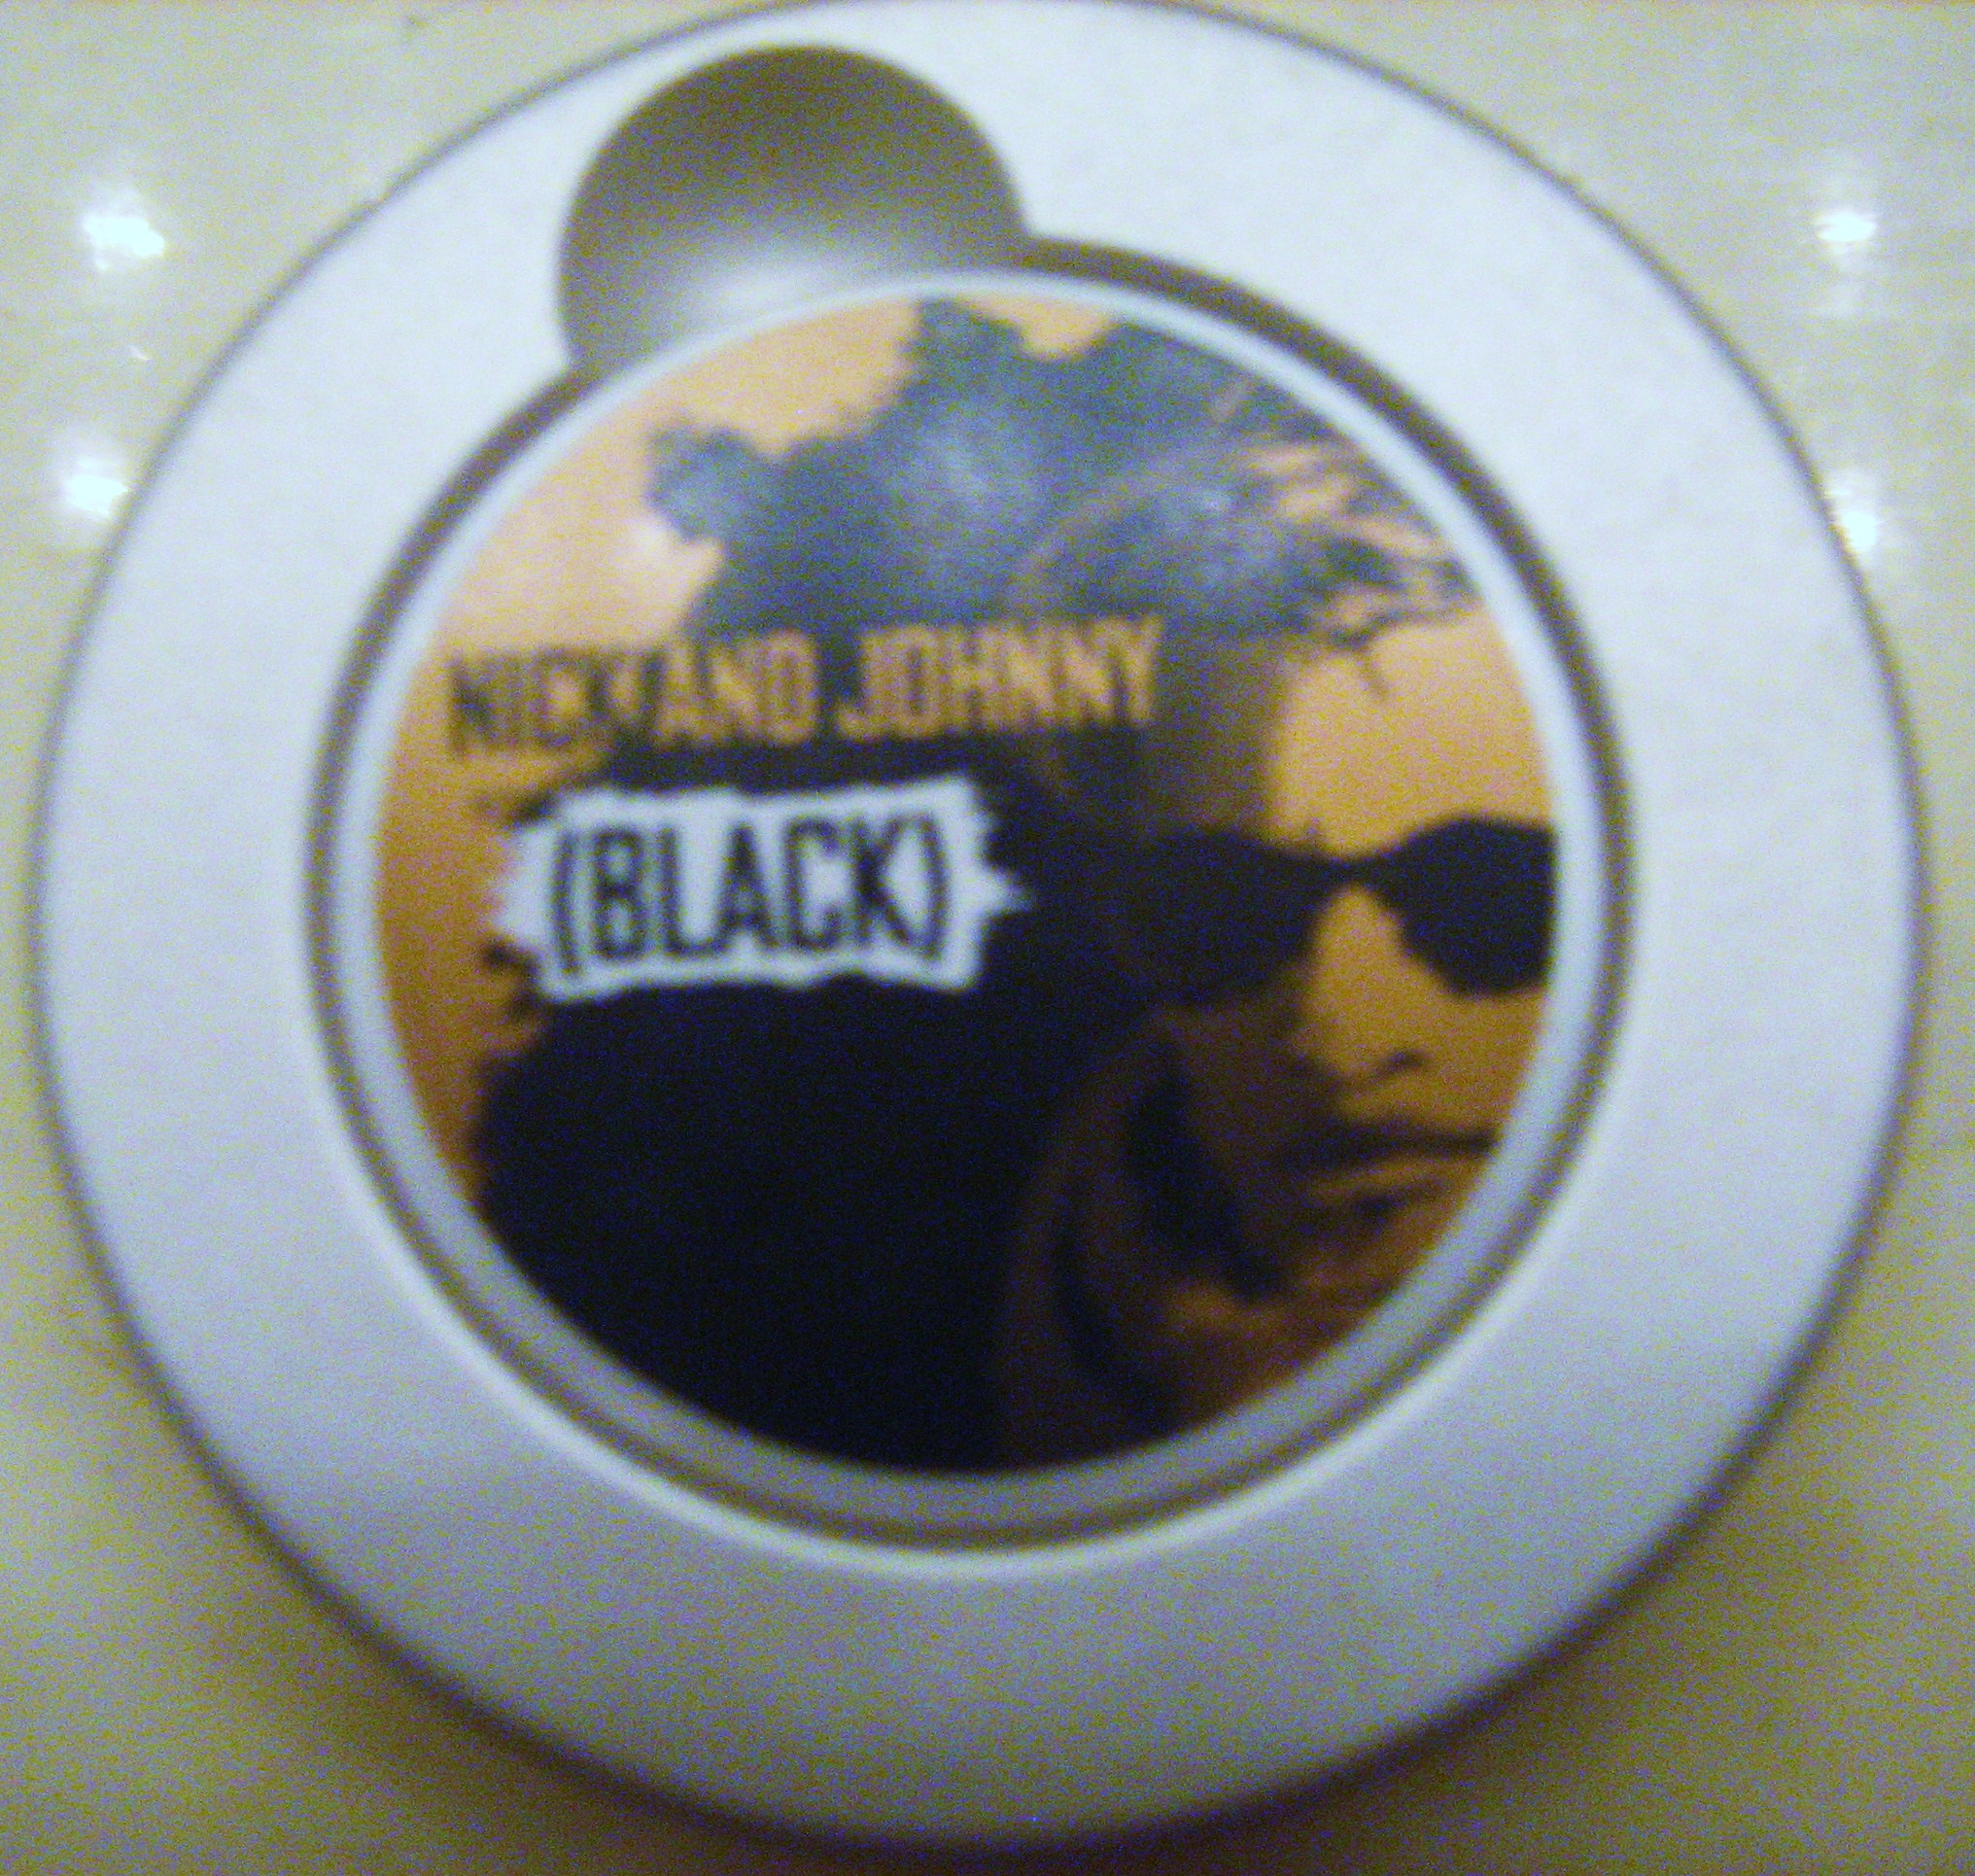 Nick and Johnny Black has great graphics on the can